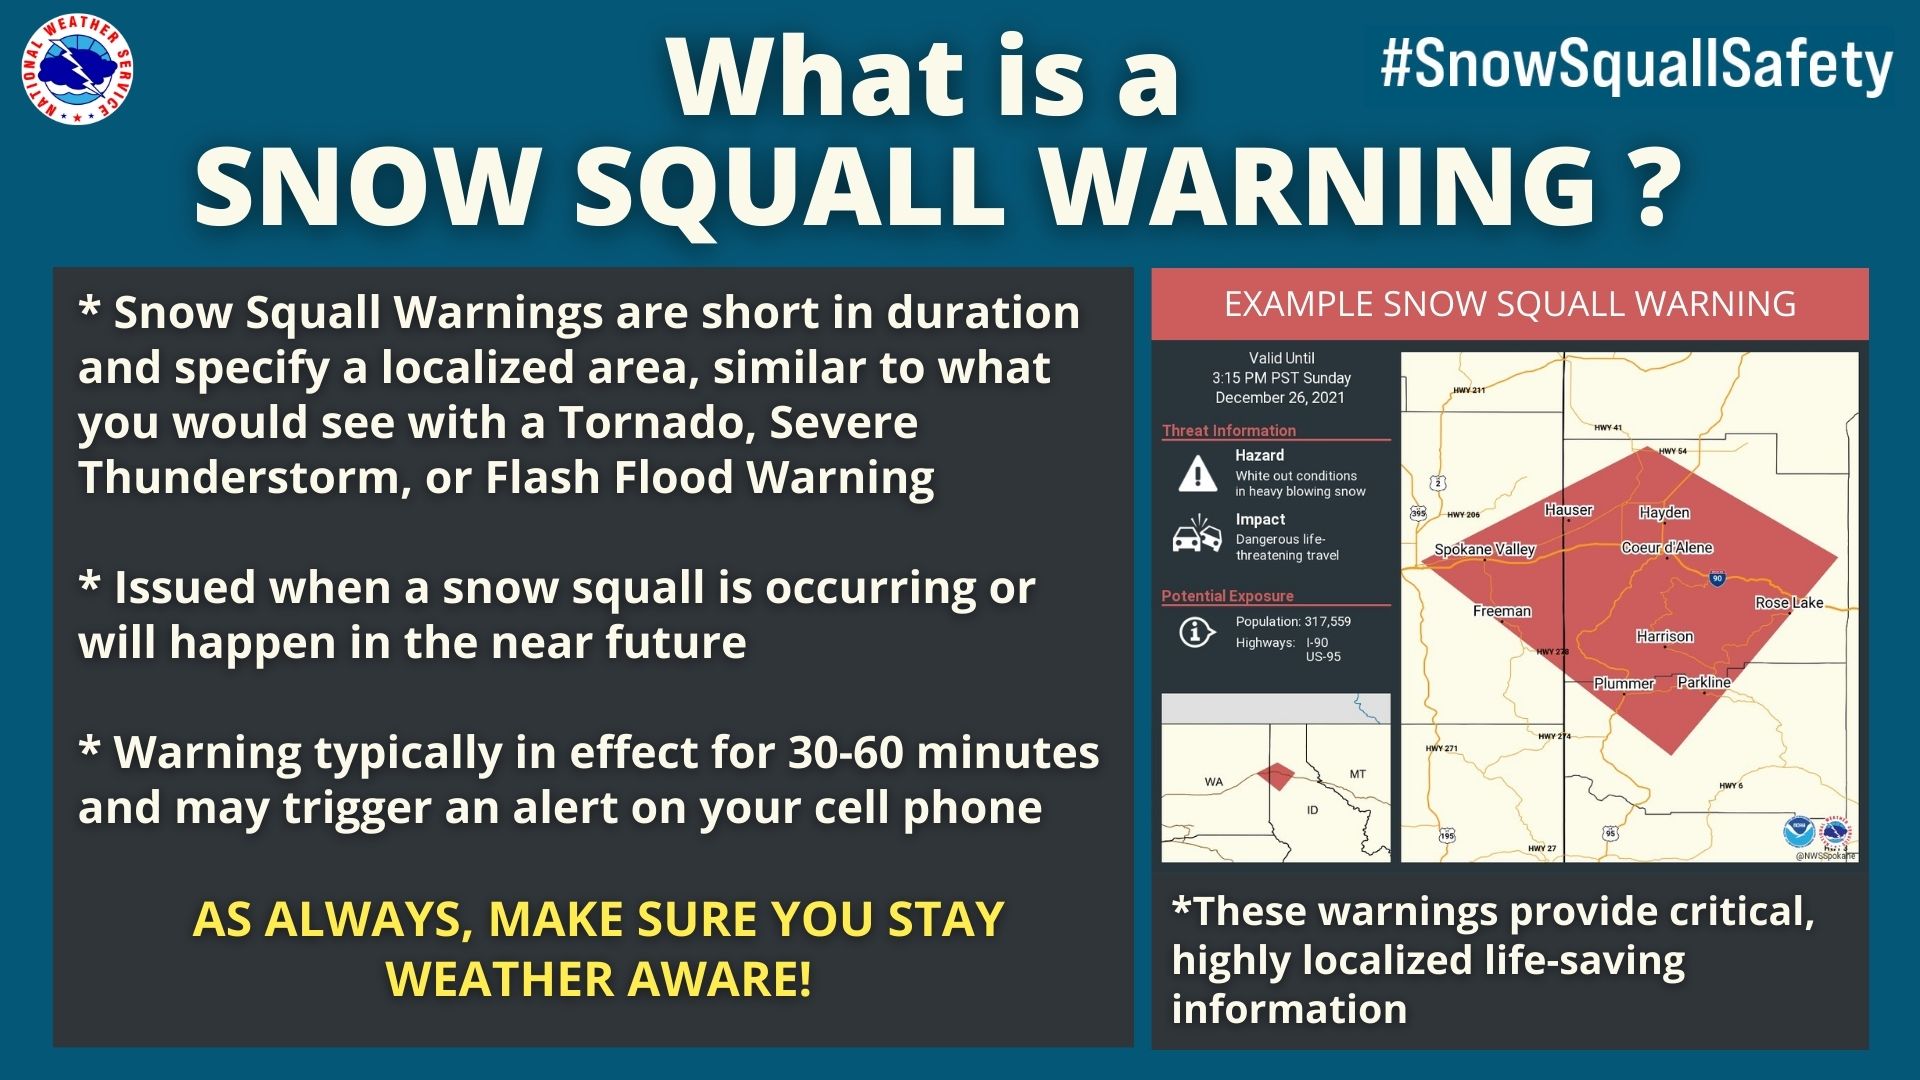 What is a Snow Squall Warning? Snow Squall Warnings are short in duration and specify a localized area, similar to what you would see with a Tornado, Severe Thunderstorm, or Flash Flood Warning. These are issued when a snow squall is occurring or will happen in the near future. The warning will typically be in effect for 30-60 minutes and may trigger an alert on your cell phone. As always, make sure you stay weather aware! These warnings provide critical, highly localized life-saving information.